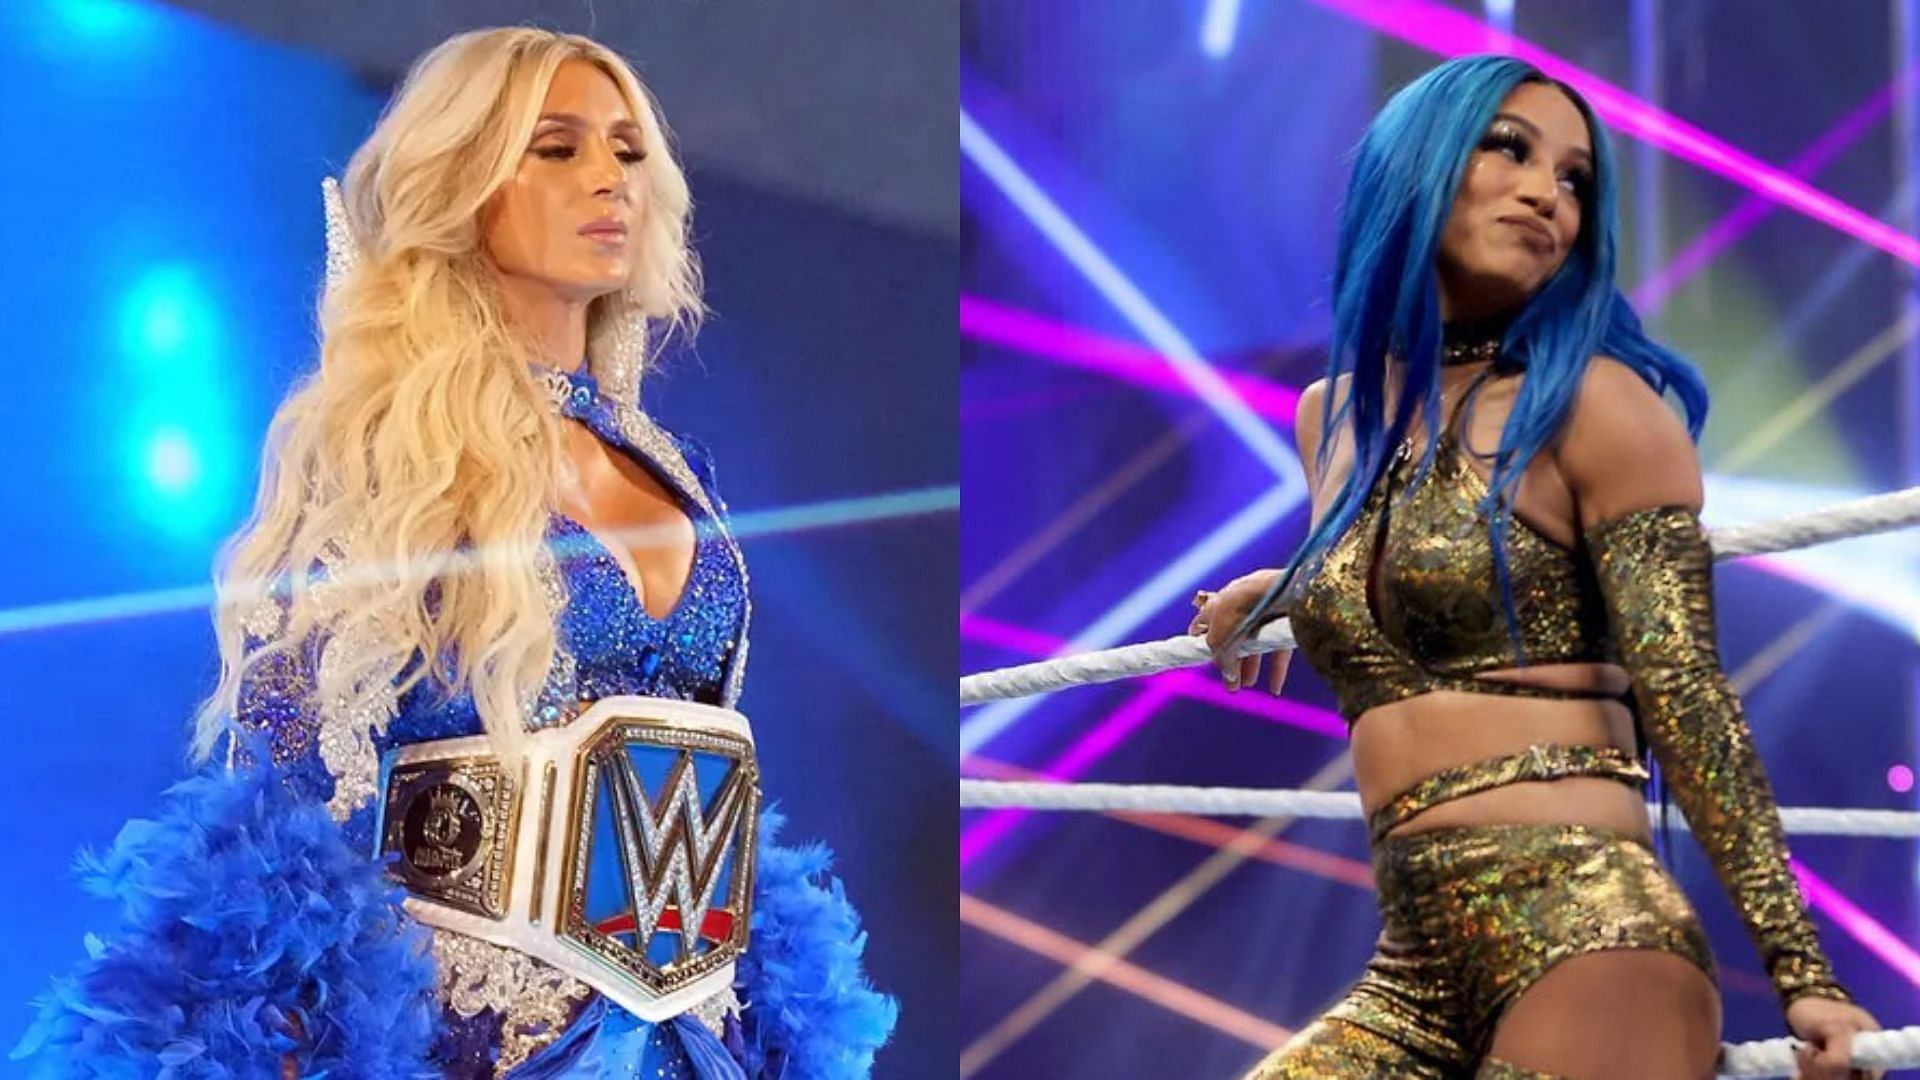 Charlotte Flair and Mercedes Mone (aka Sasha Banks) had a highly publicized feud in 2016